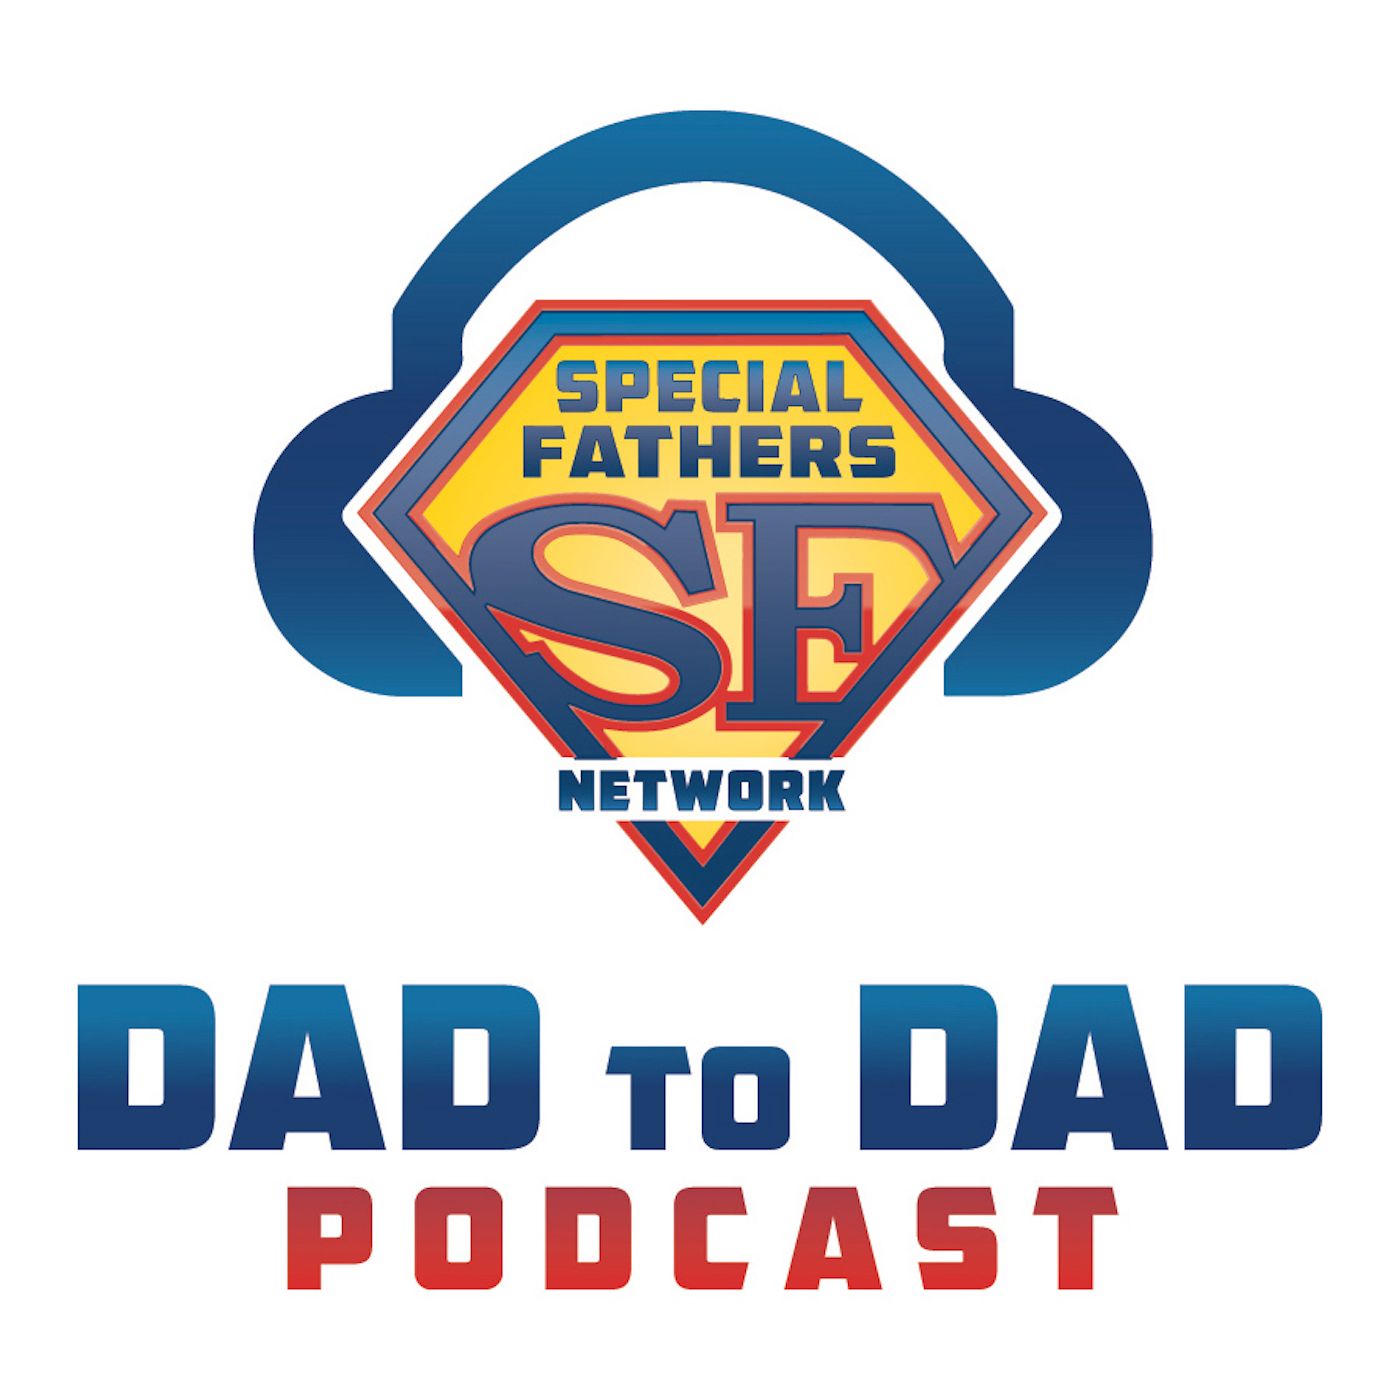 SFN Dad To Dad 300 - David Hirsch, Founder Of 21st Century Dads Foundation & Host Of The SFN Dad To Dad Podcast Reflects On The Past 7 Years